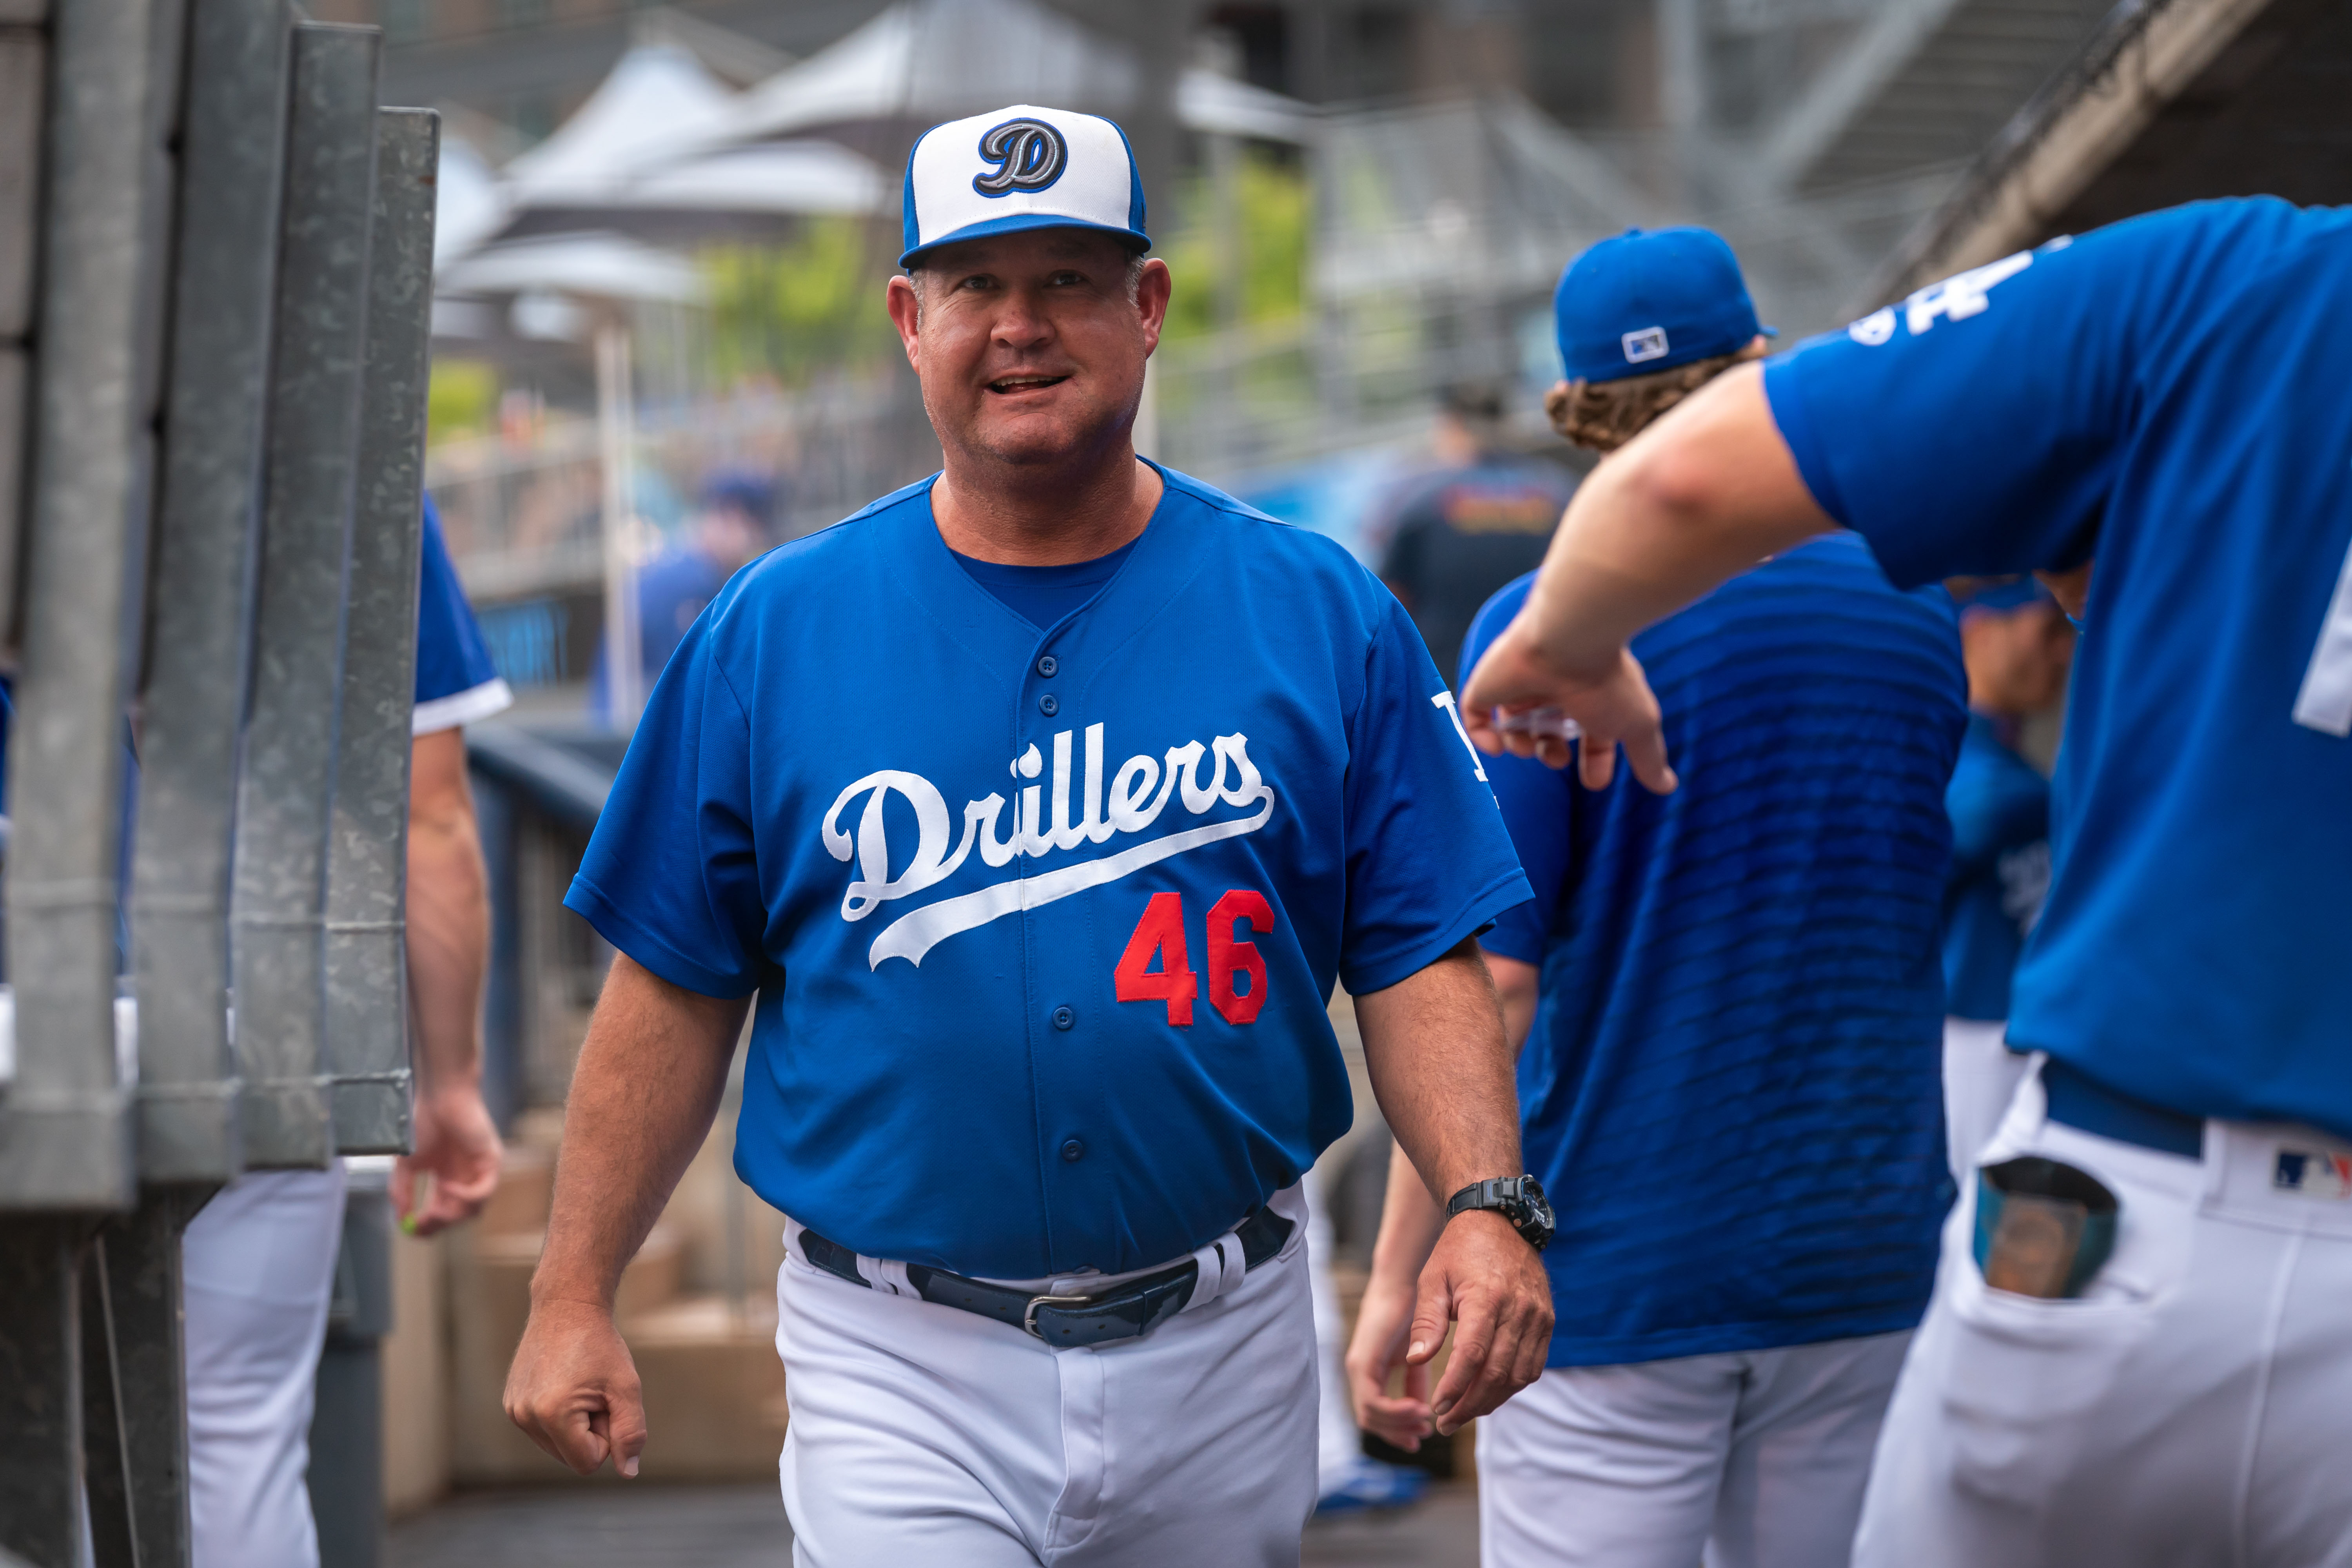 Scott Hennessey has managed Dodgers Double-A affiliate Tulsa since 2017.